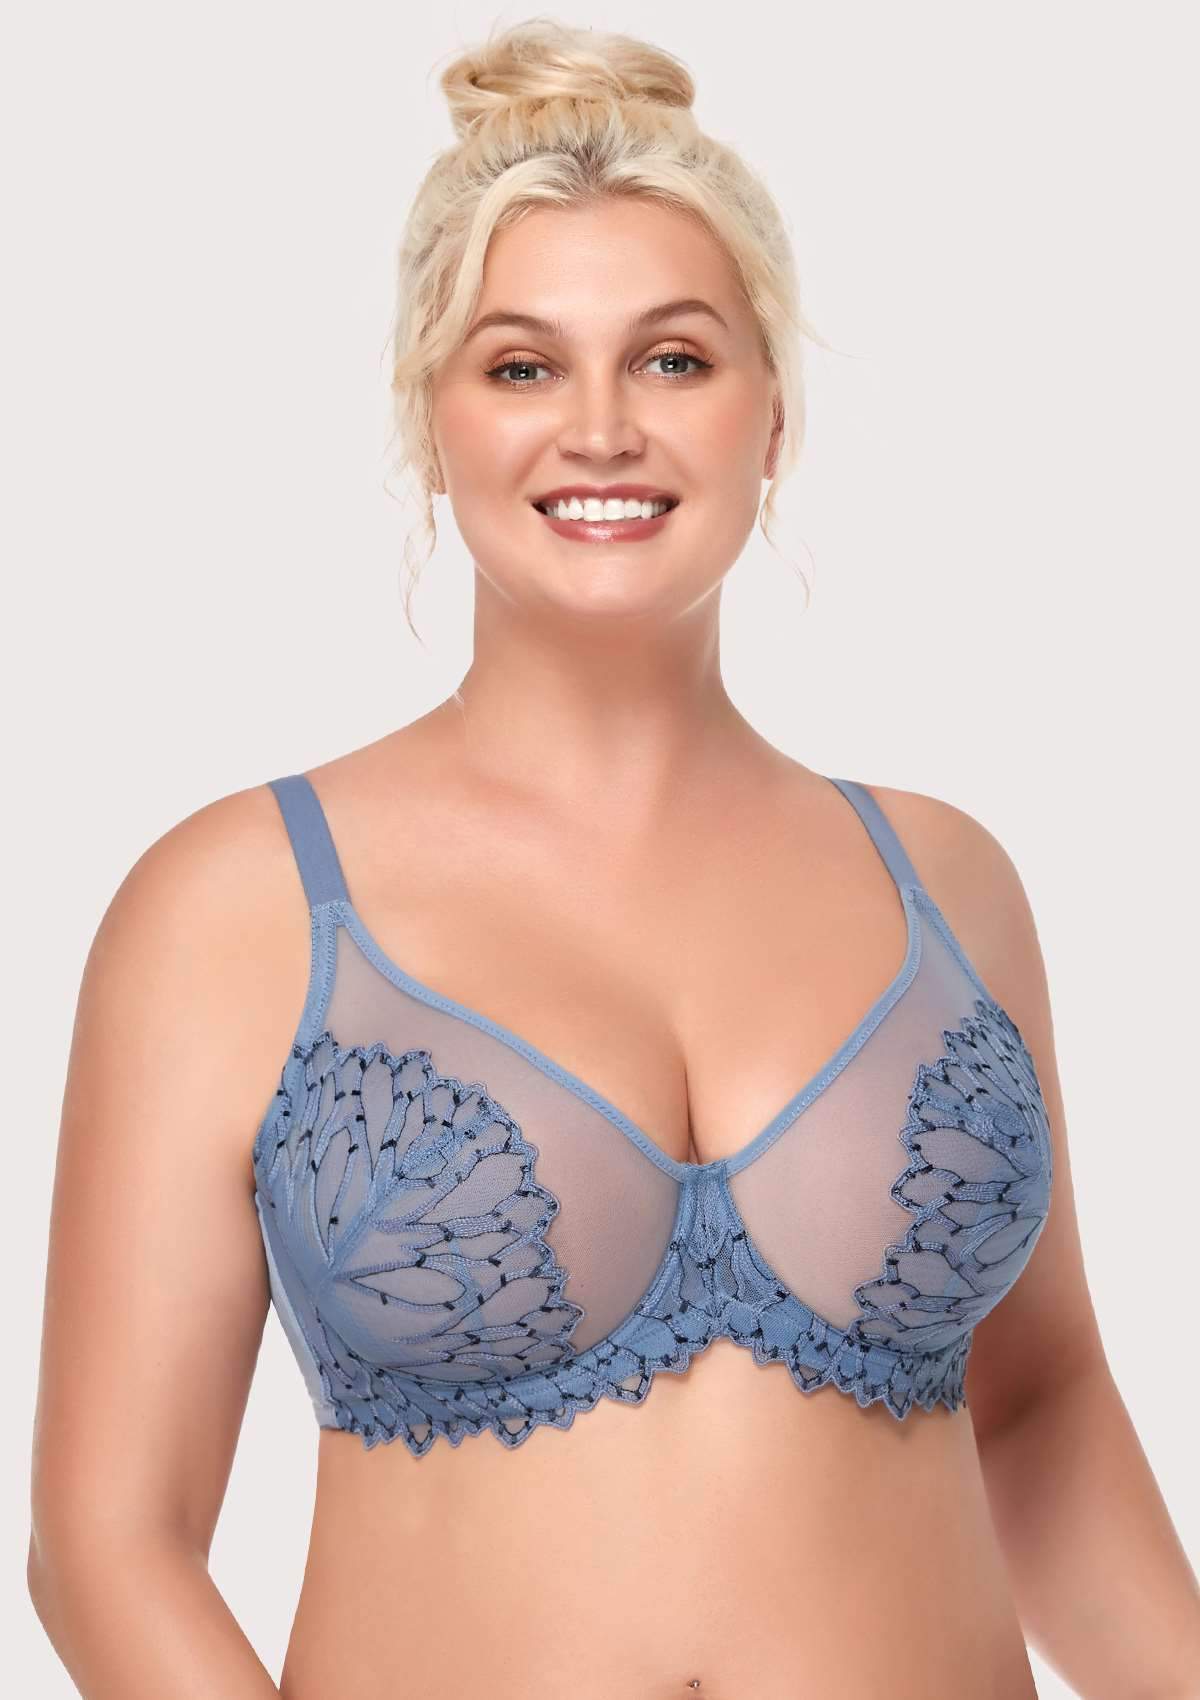 HSIA Chrysanthemum Plus Size Lace Bra: Back Support Bra For Posture - Blue / 32 / D